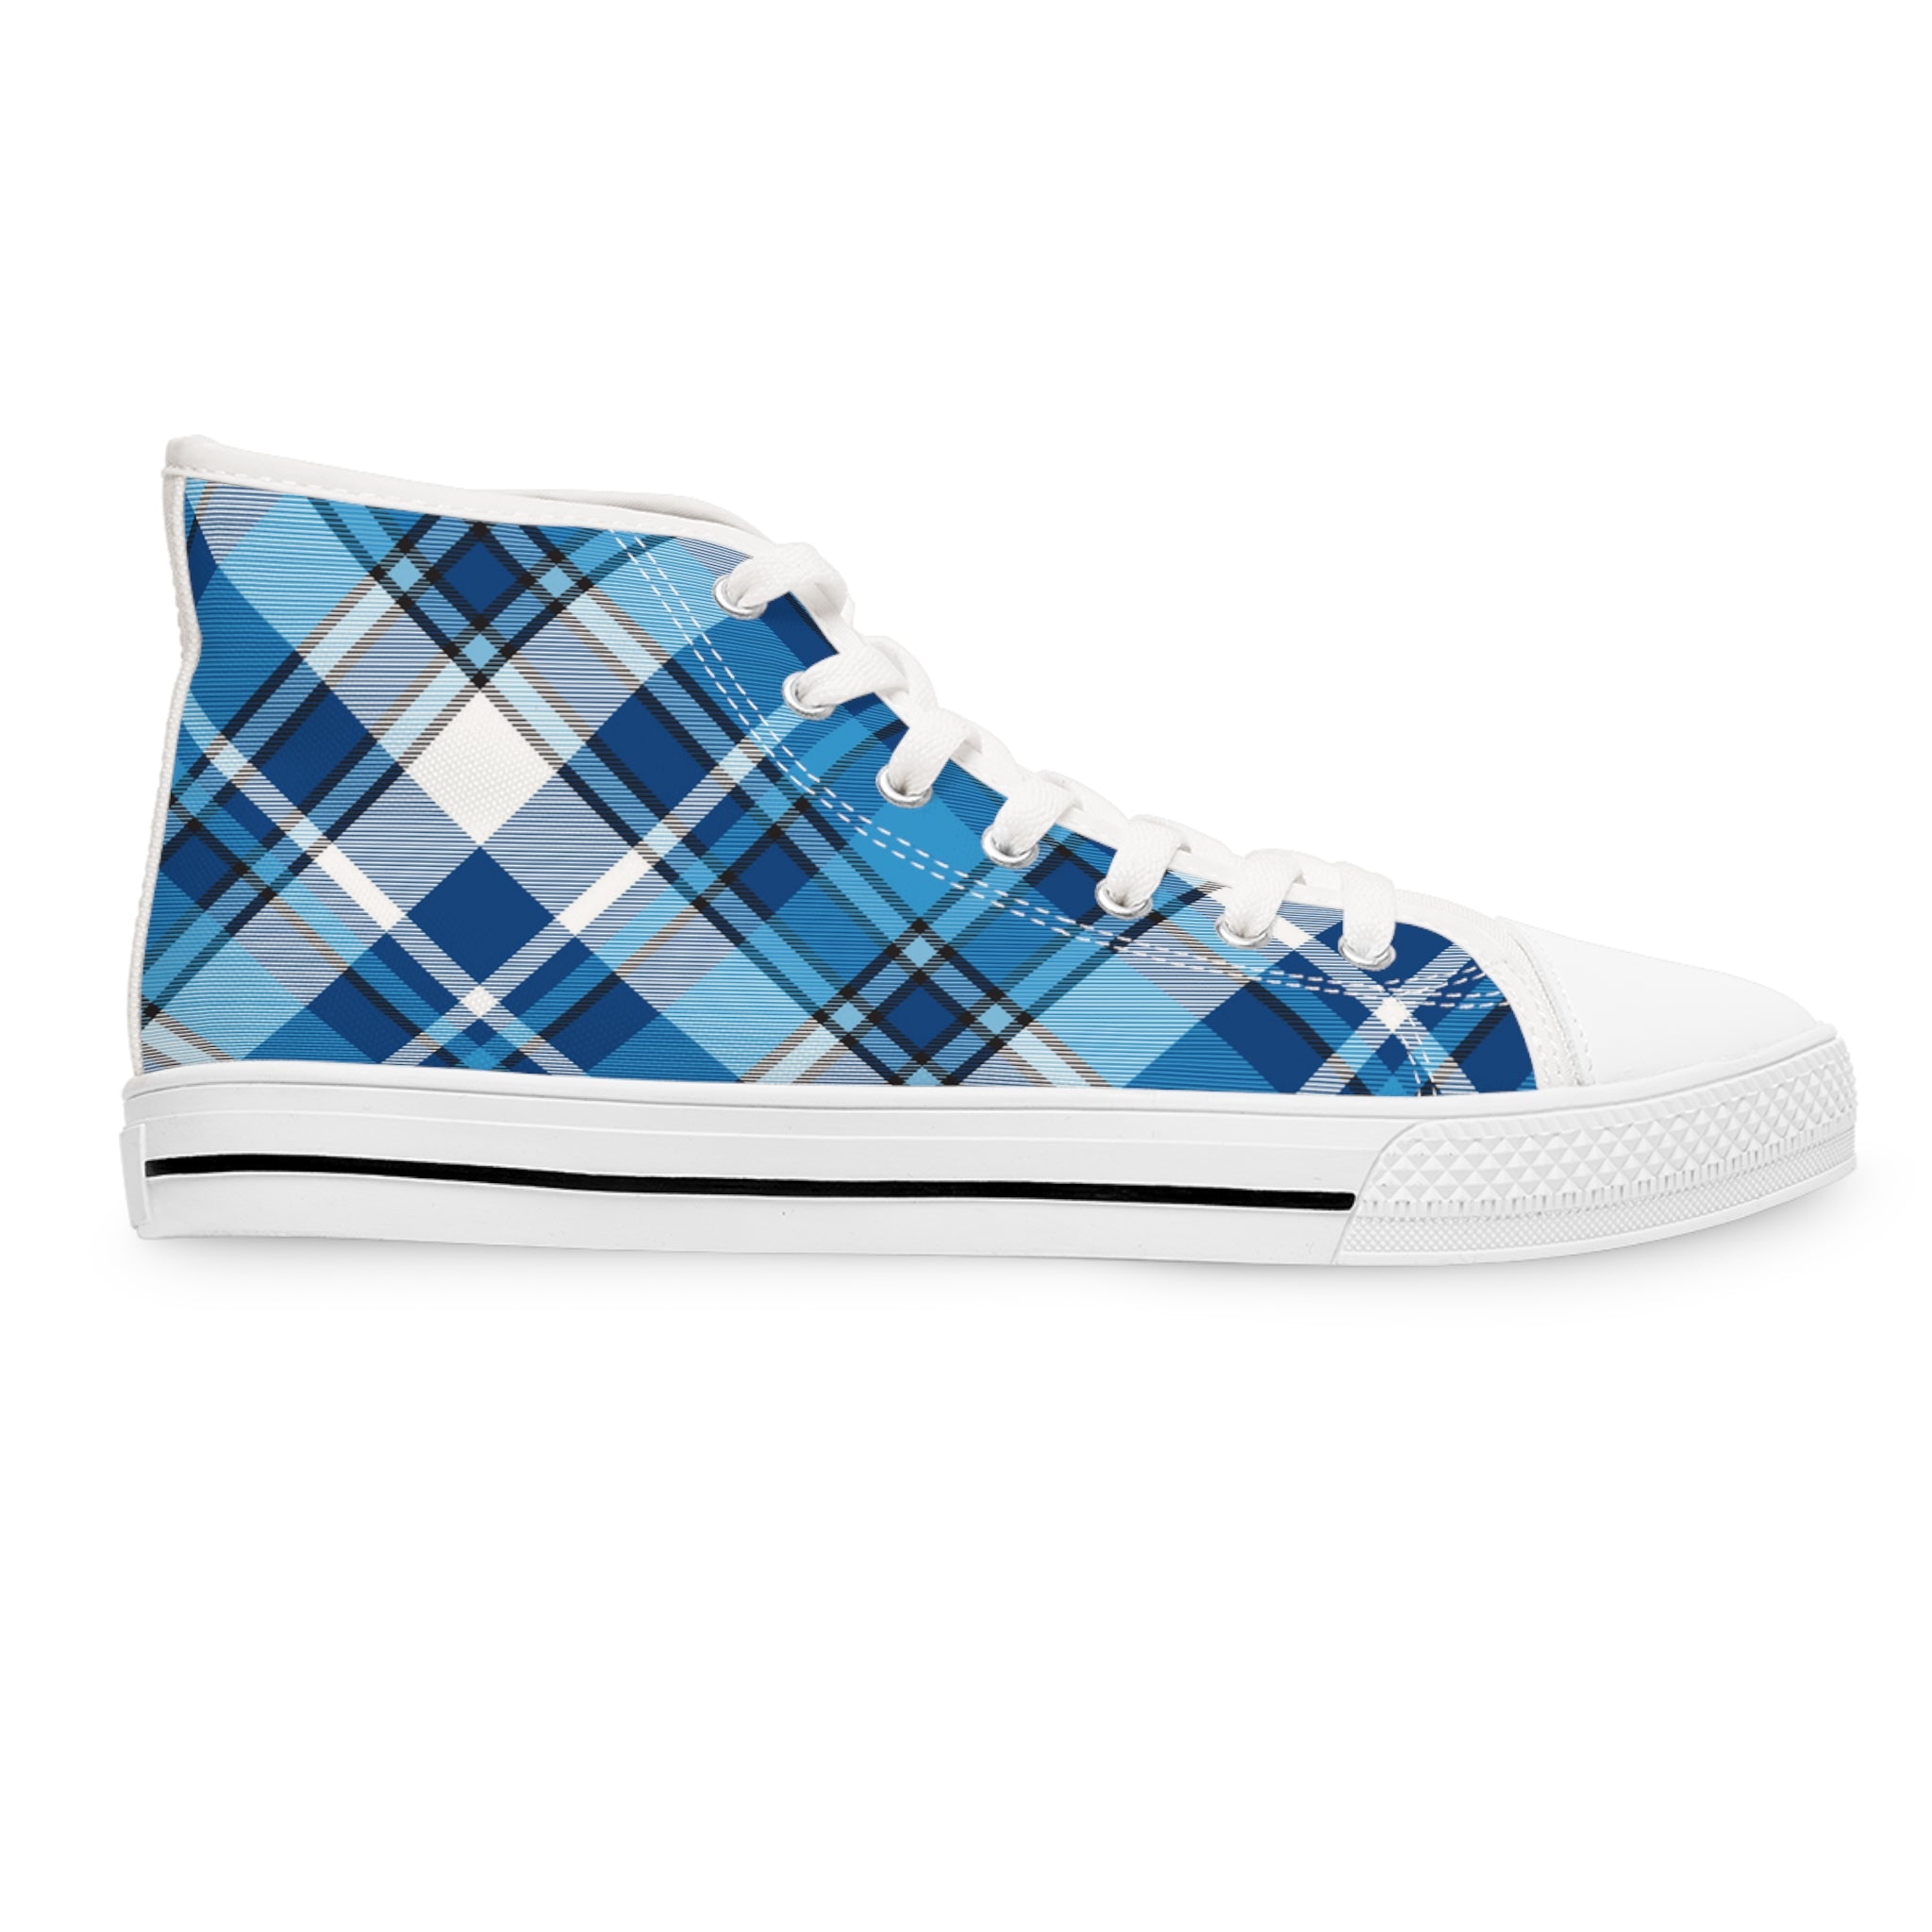 Groove Fashion Collection in Blue Plaid Women's High Top Sneakers, Unique Women's Shoes, Casual High Tops, Fashionable Women's Sneakers Shoes  The Middle Aged Groove